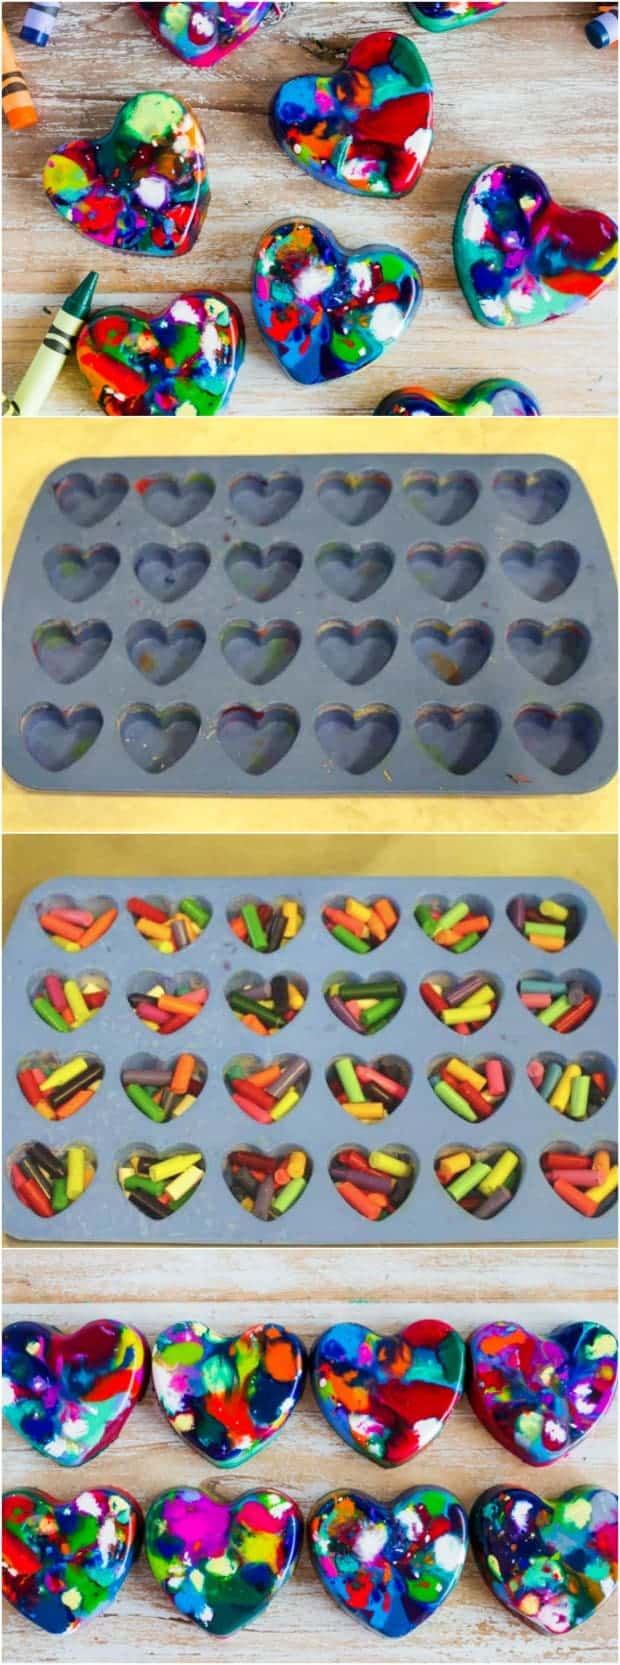 A pictorial on how to make crayon hearts.